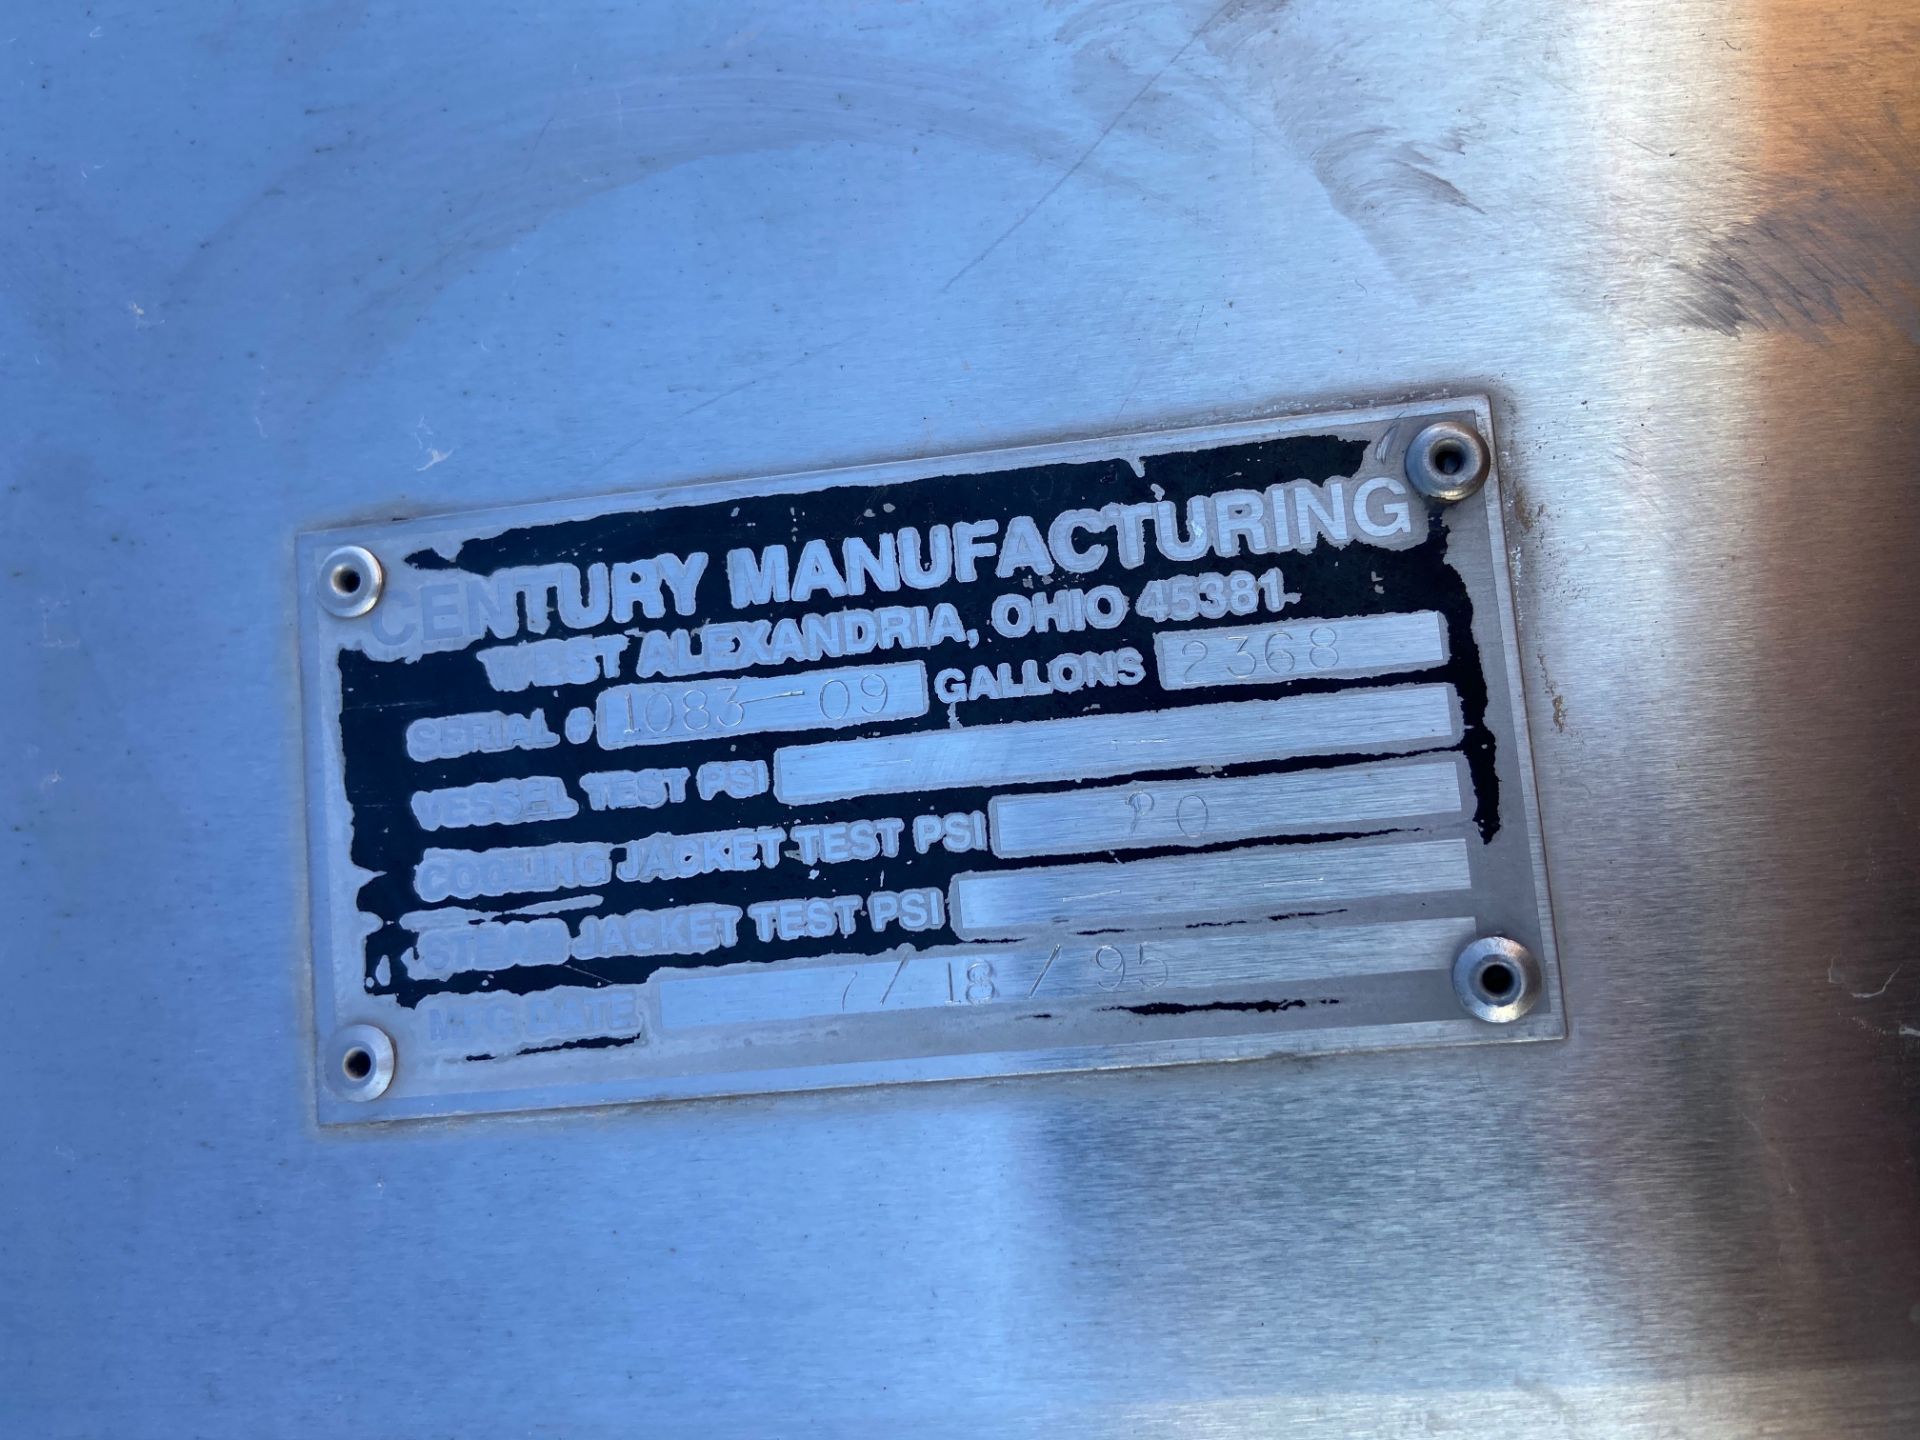 Century Stainless Steel Tank, 2368 Gal, Serial# 1083-09, Rigging/ Loading Fee: $50 - Image 4 of 5